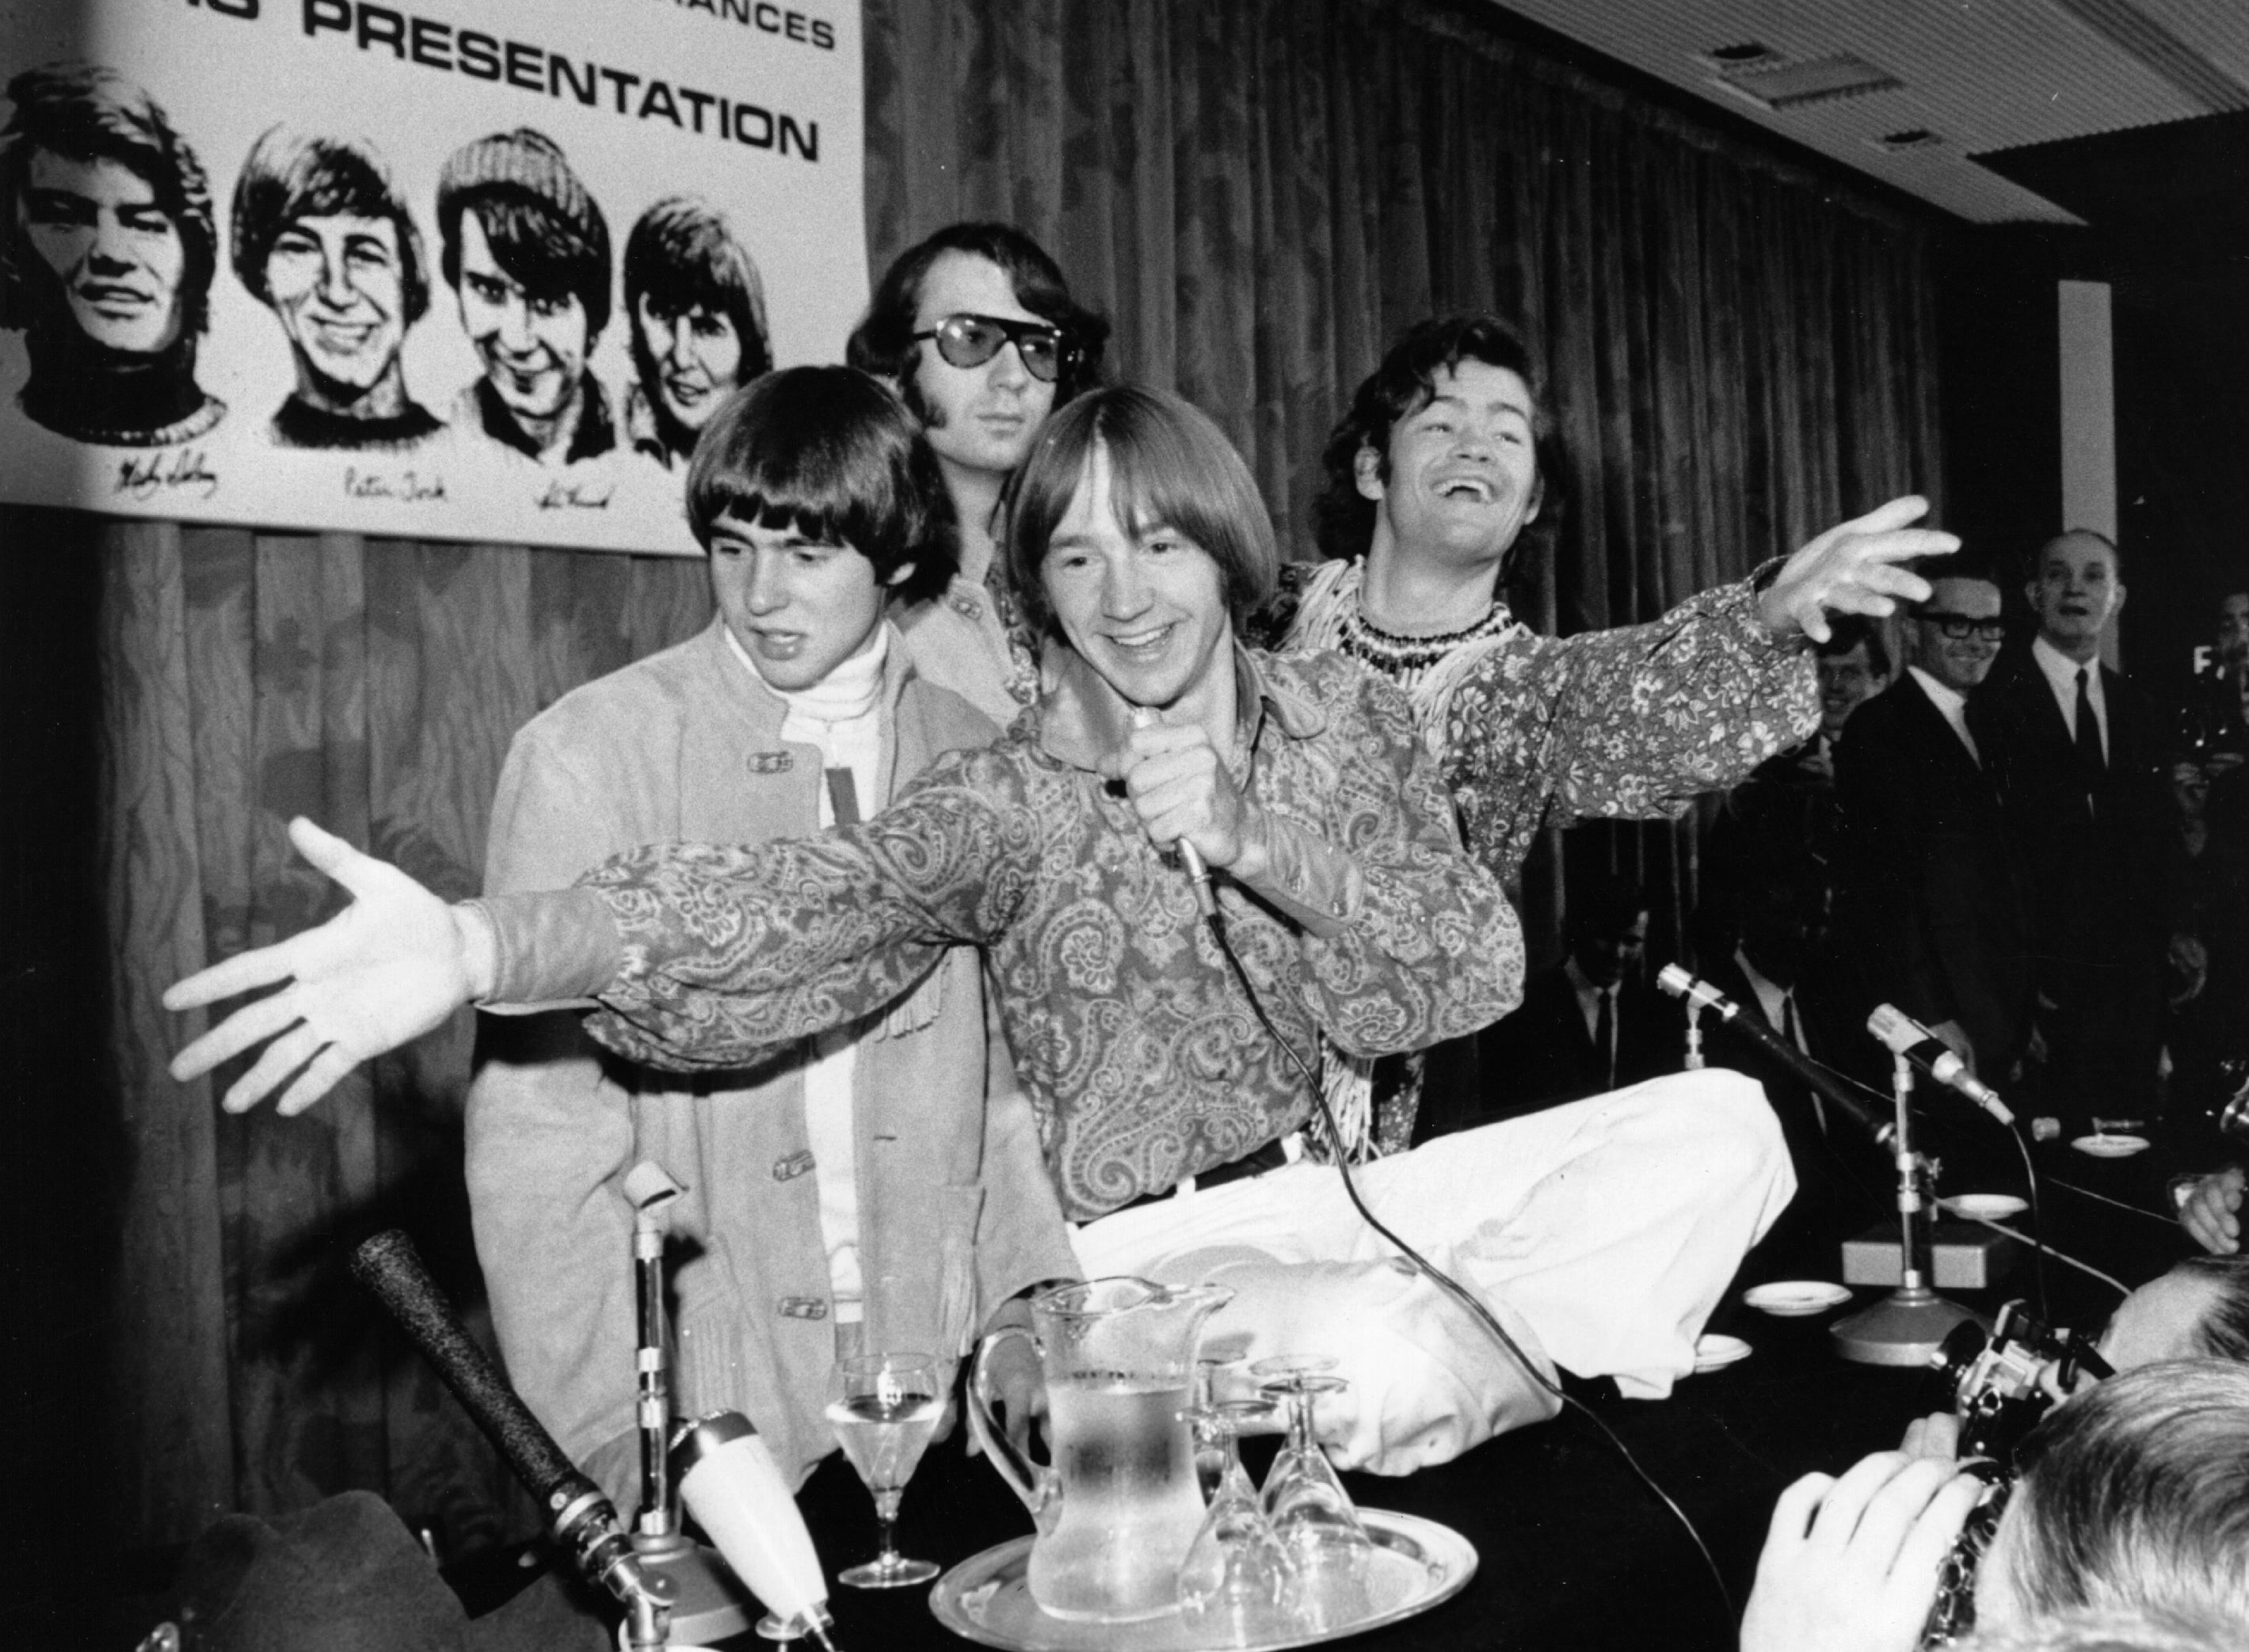 The Monkees at a table